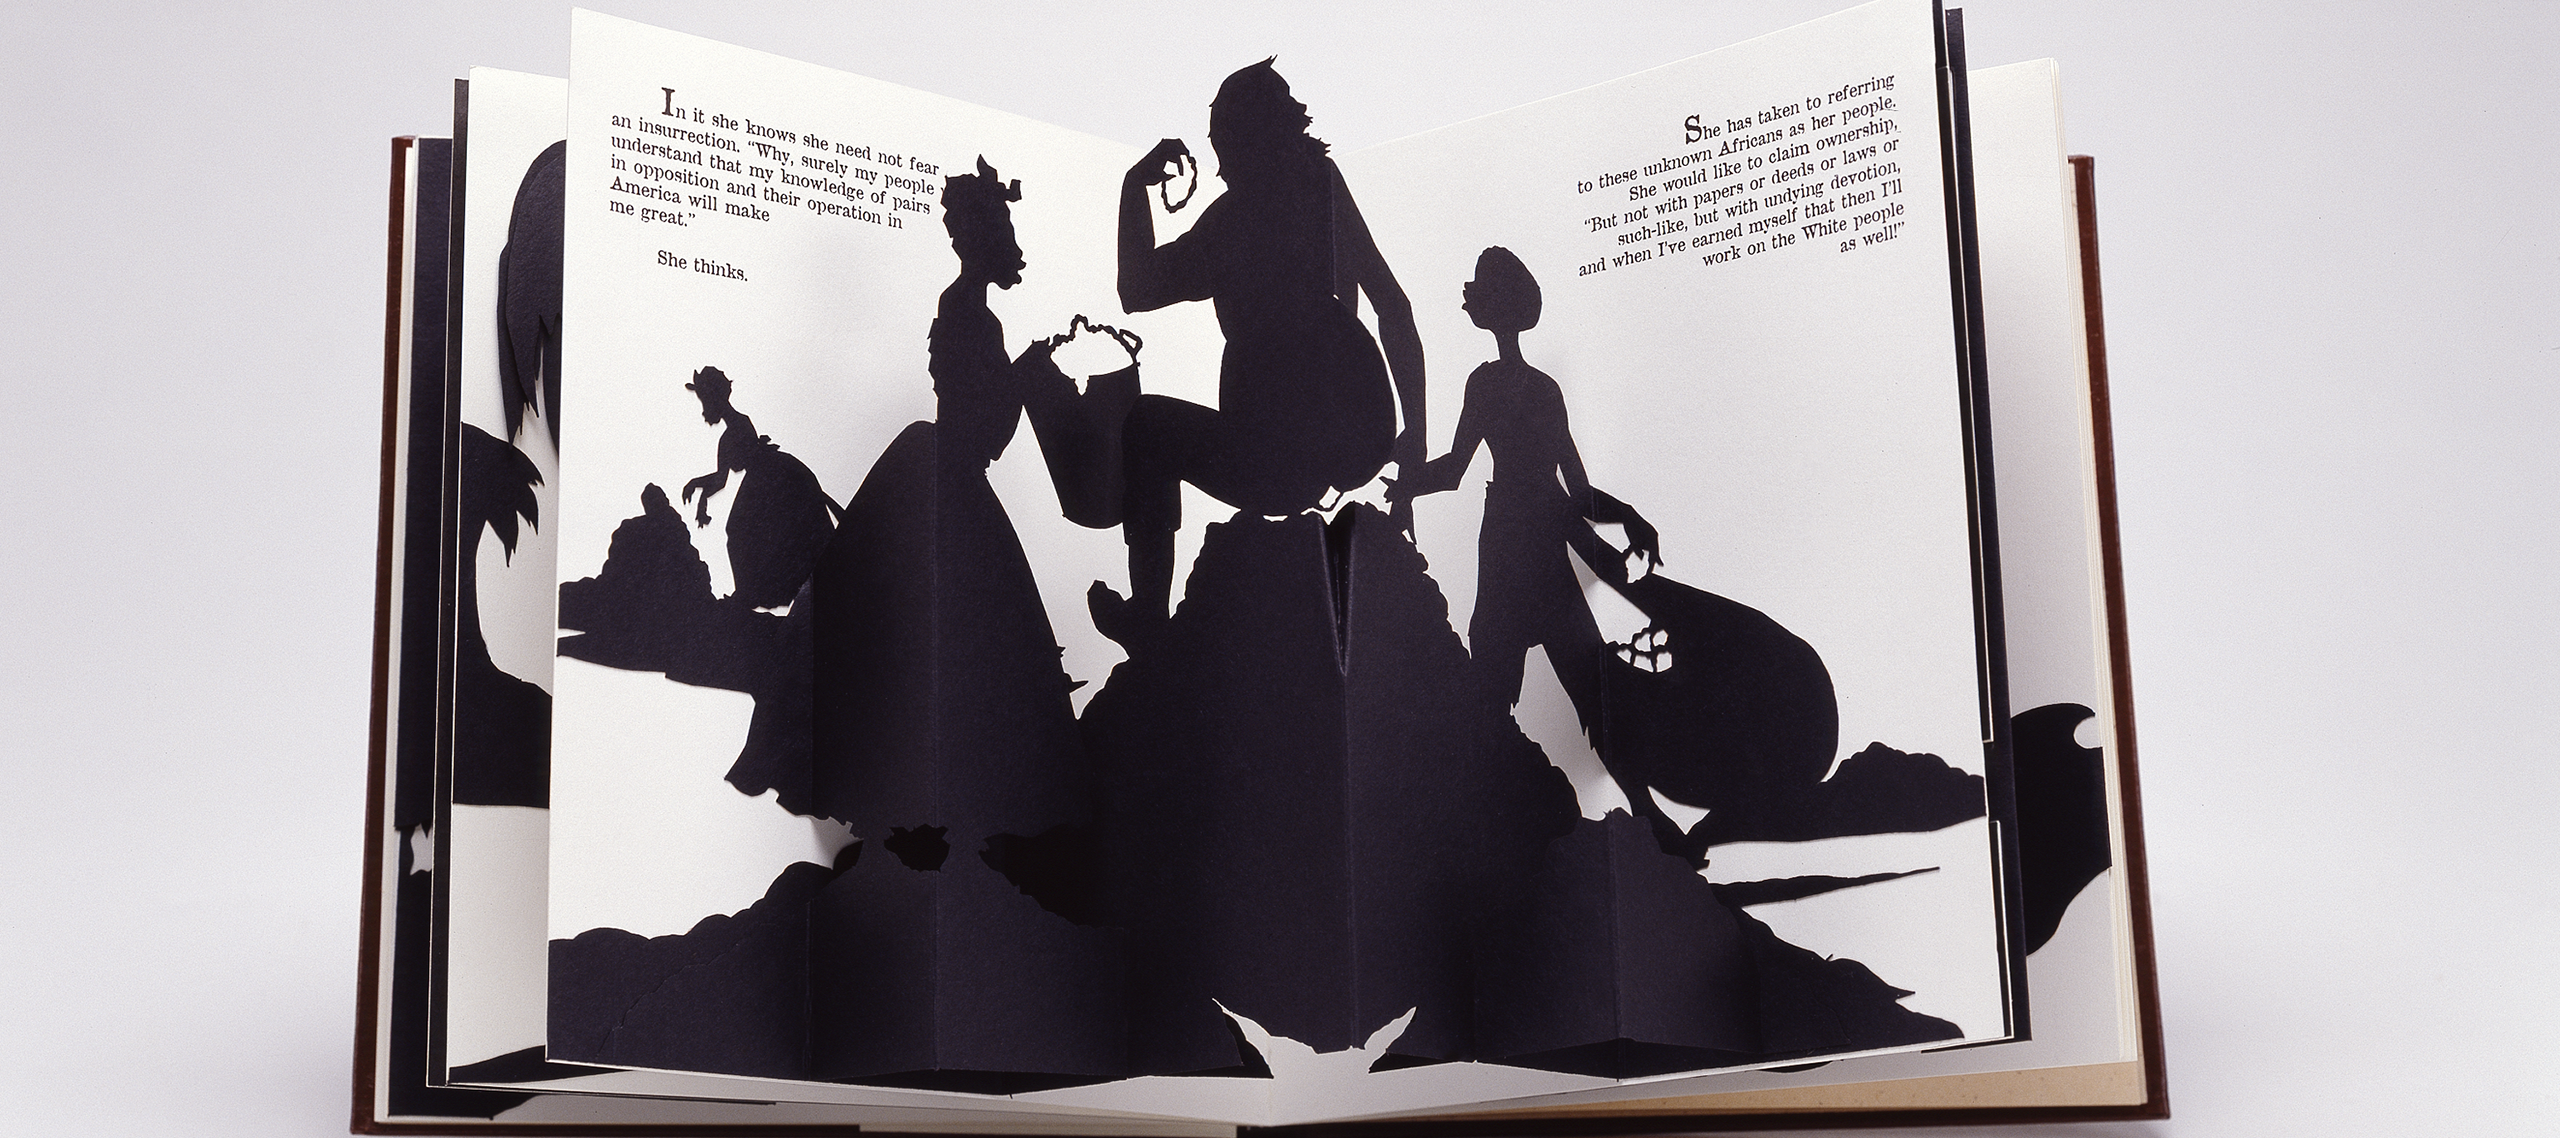 Four black silhouetted figures emerge from the white, open pages of a pop-up book. They appear to be engaged in manual labor. Two of the figures wear full floor-length skirts.